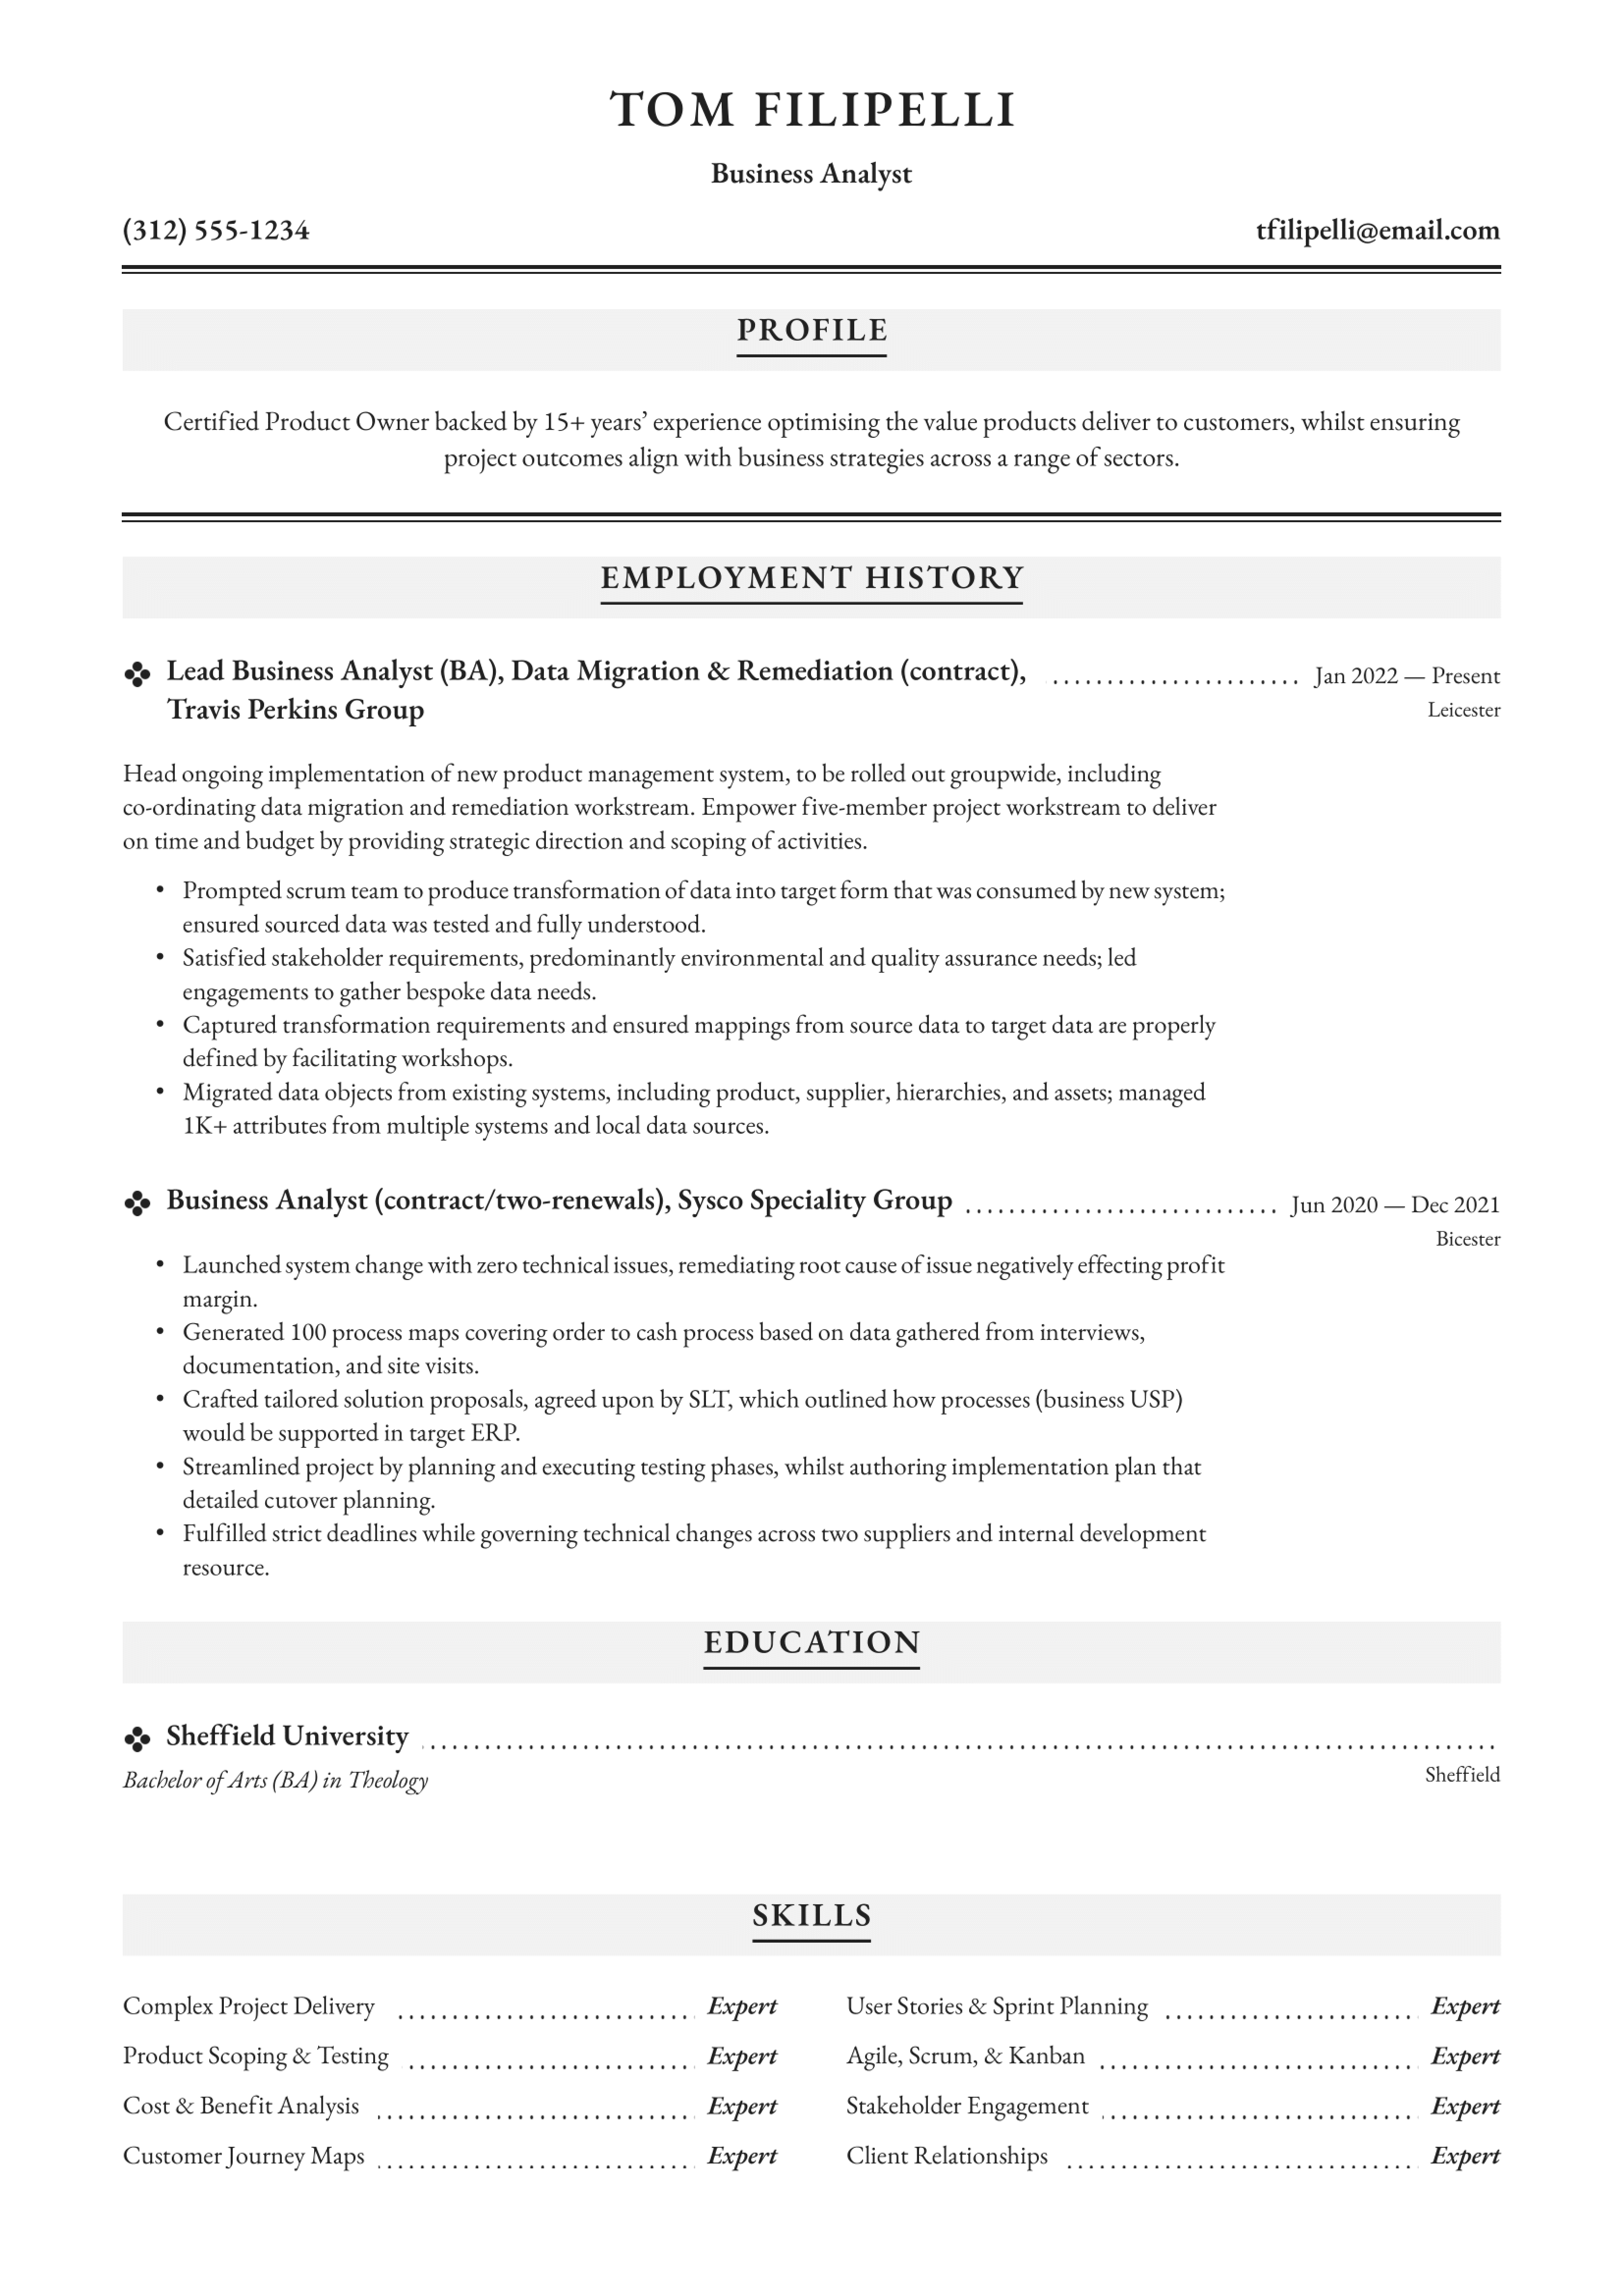 business-analyst--resume-example.png